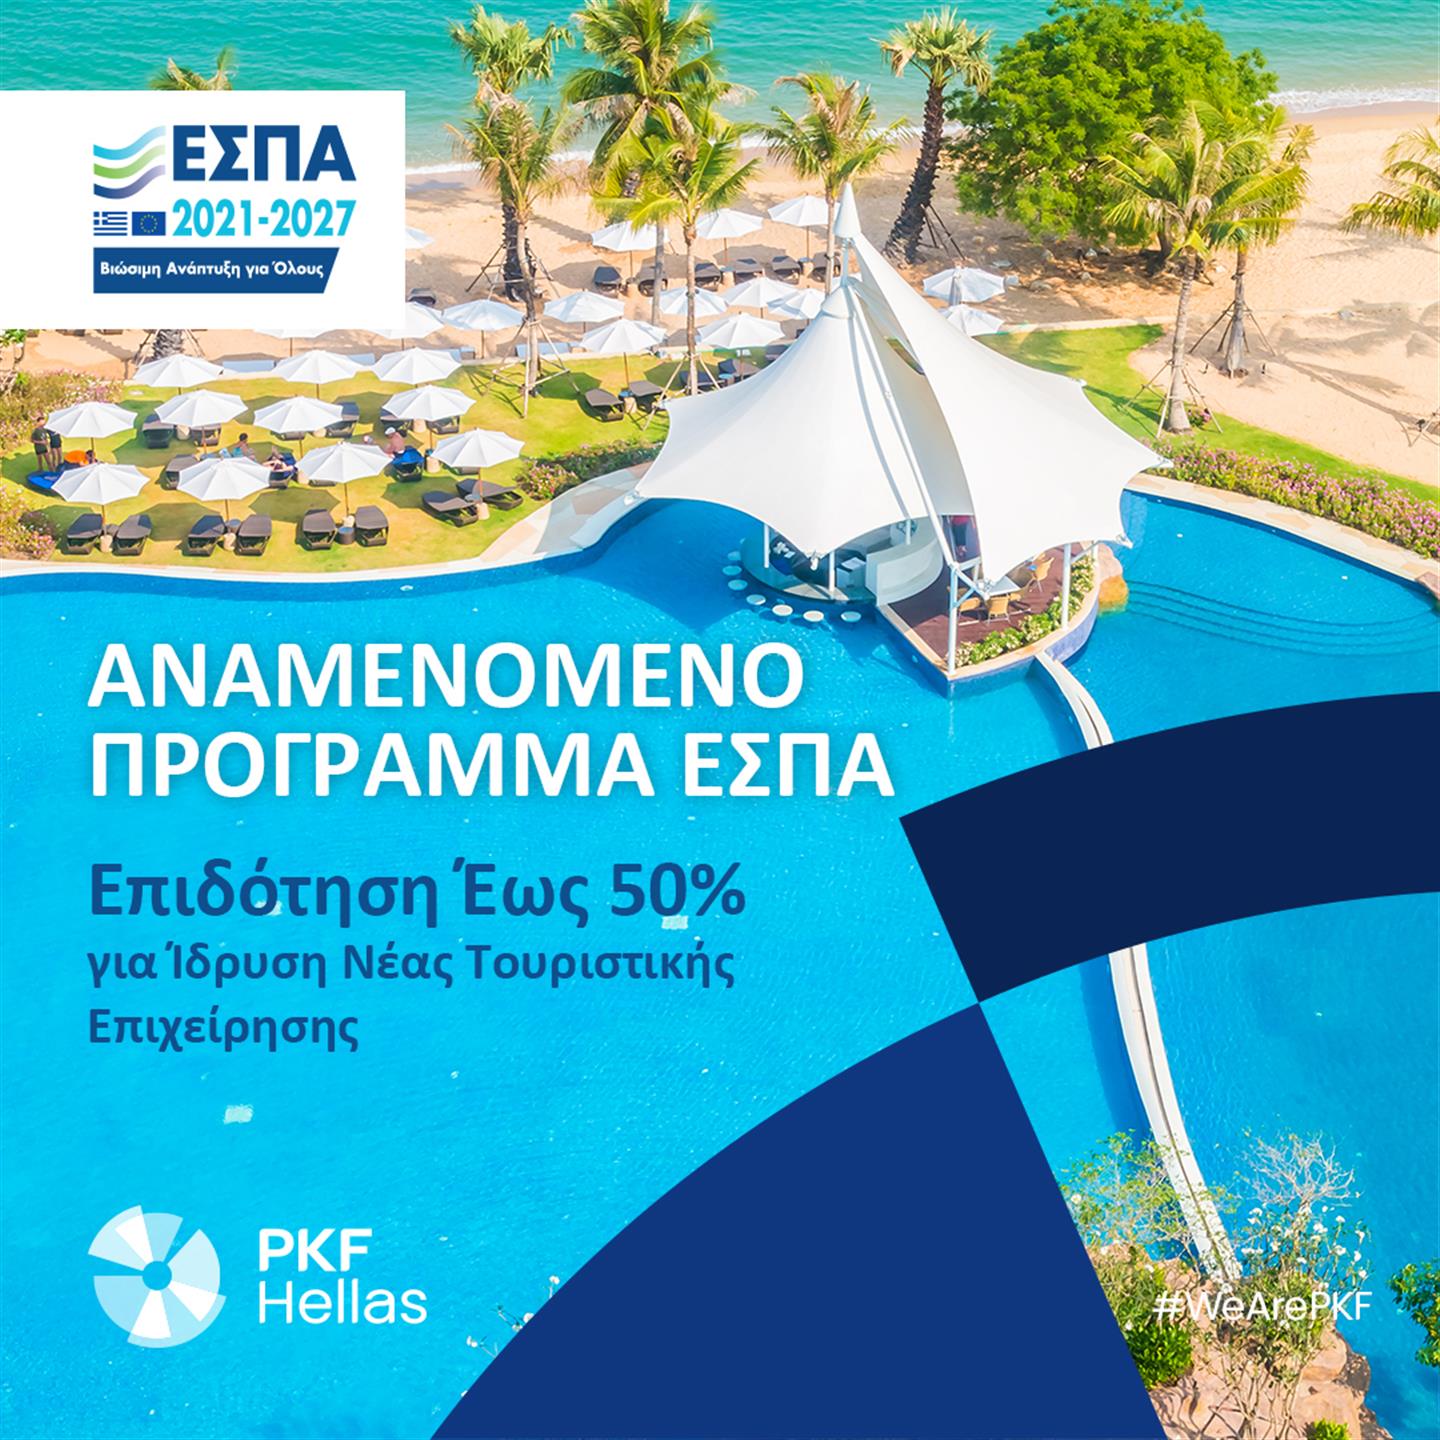 EXPECTED ACTIONS ESPA- TOURISM INVESTMENTS